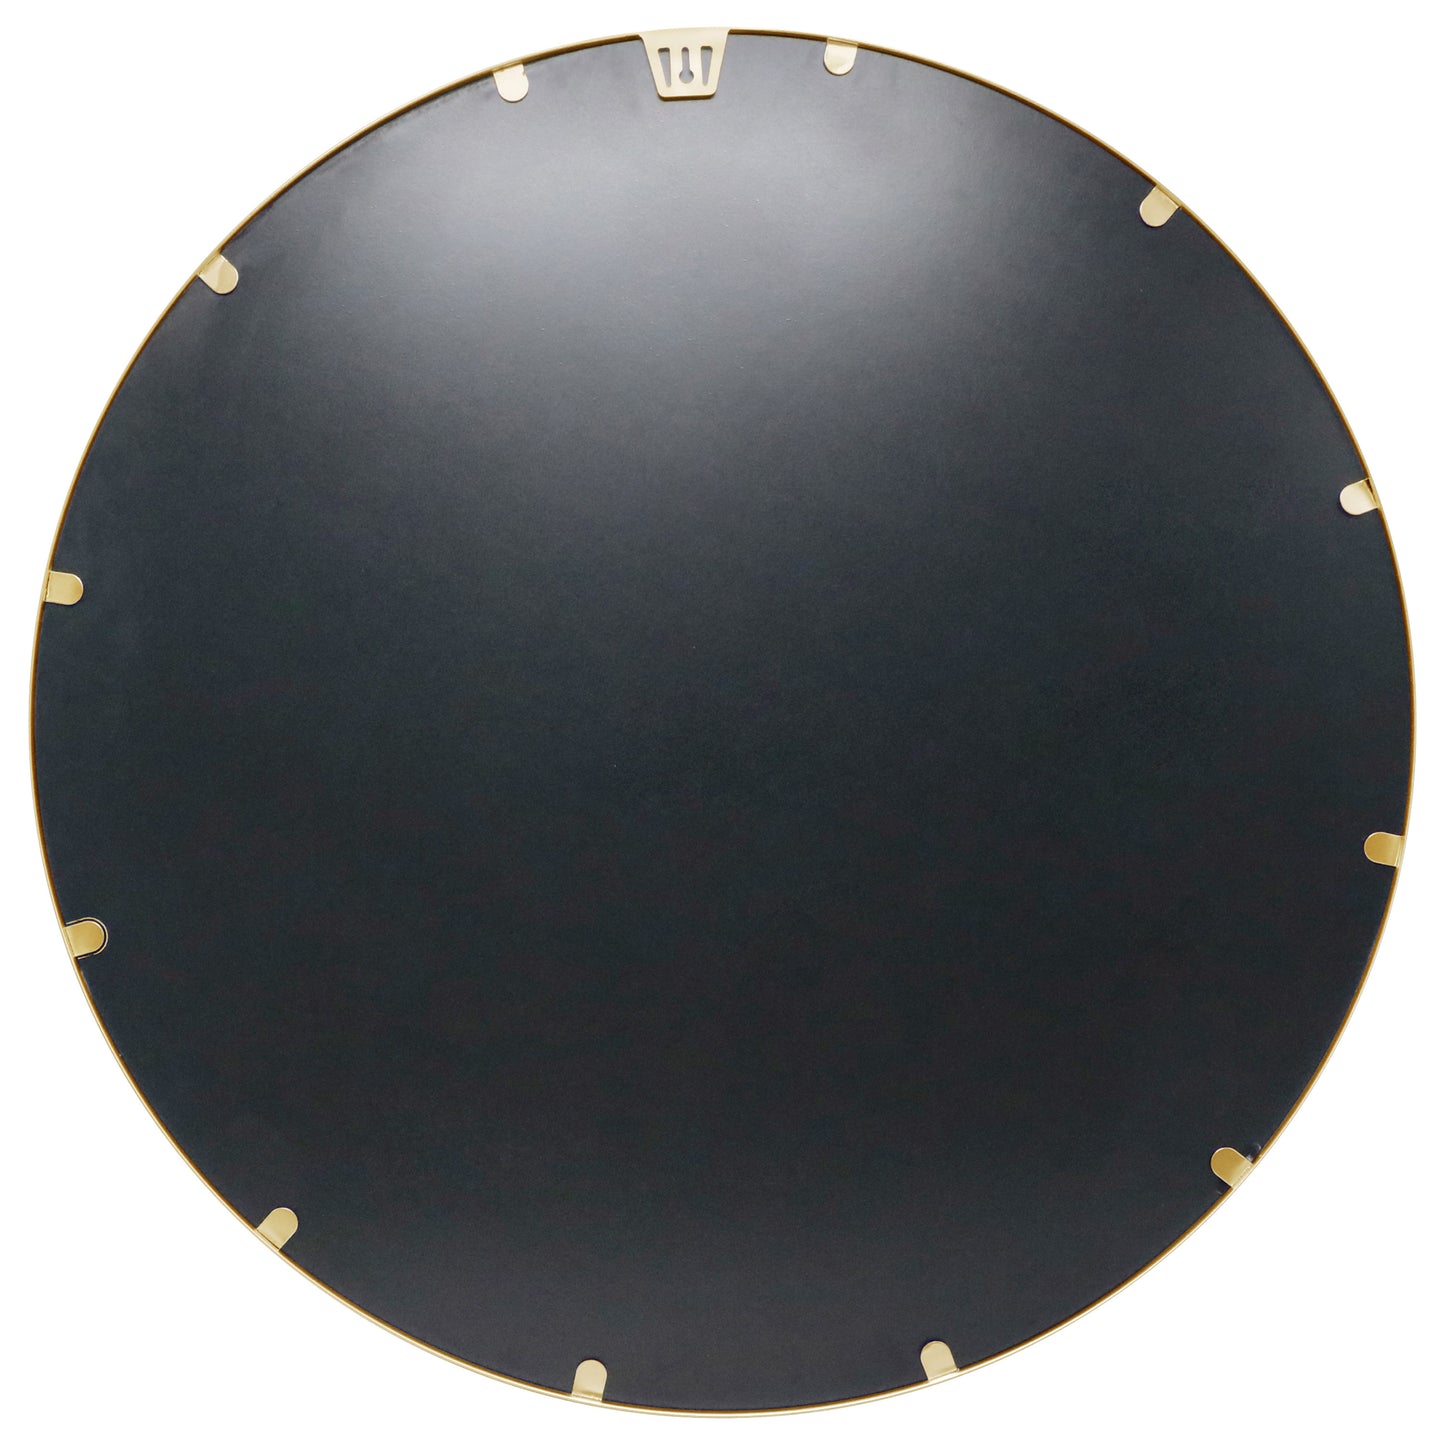 Gold 36" Round Wall Mirror HFKHD-6GD-CRE8-591315-GG